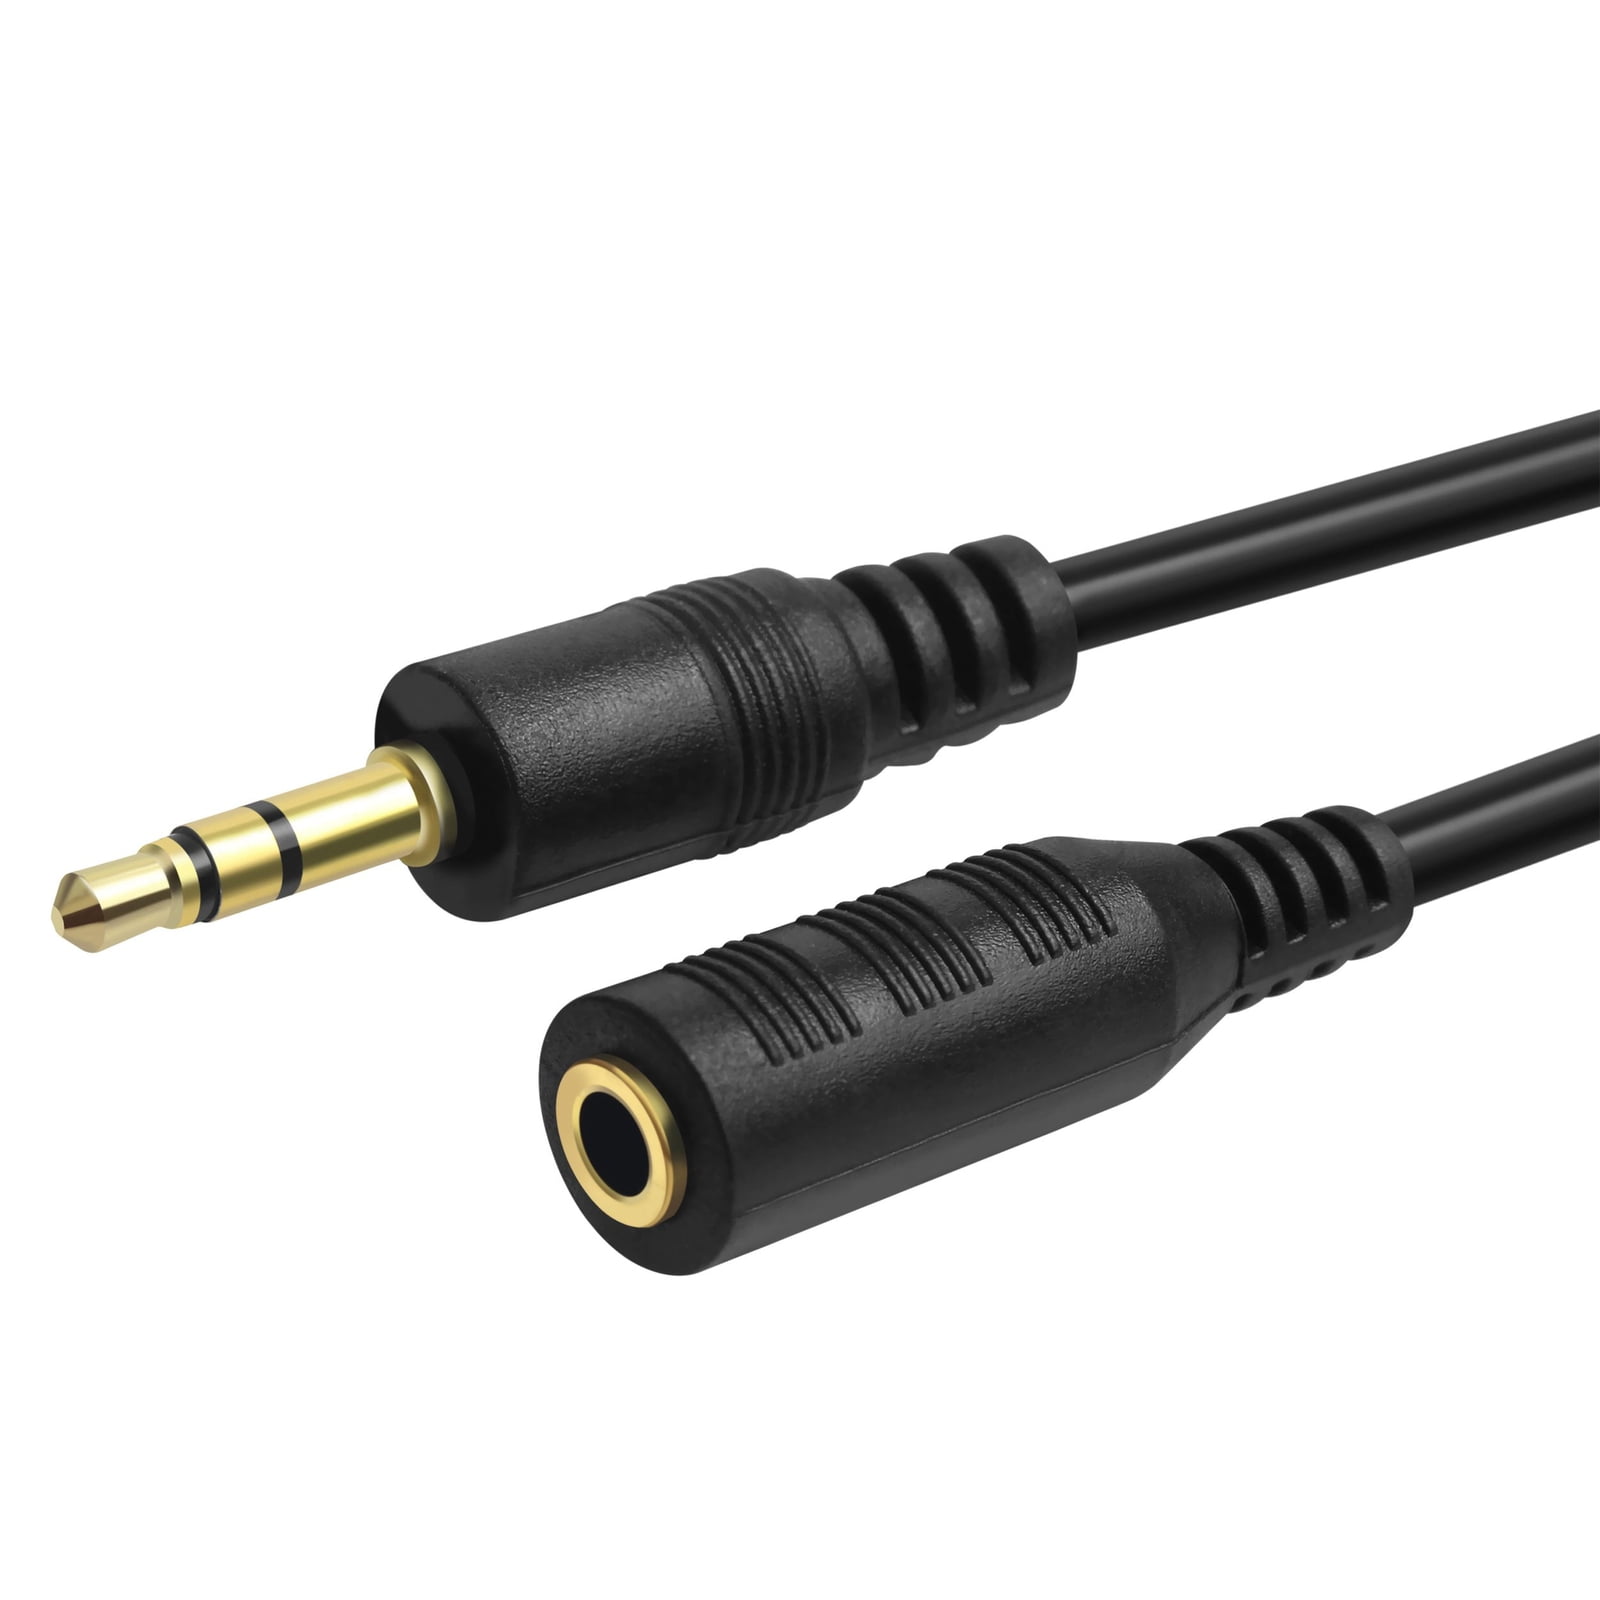 iPad Smartphones UGREEN 3.5mm Male to Female Extension Stereo Audio Extension Cable Adapter Gold Plated Compatible for iPhone 10FT Tablets Media Players Black PVC 